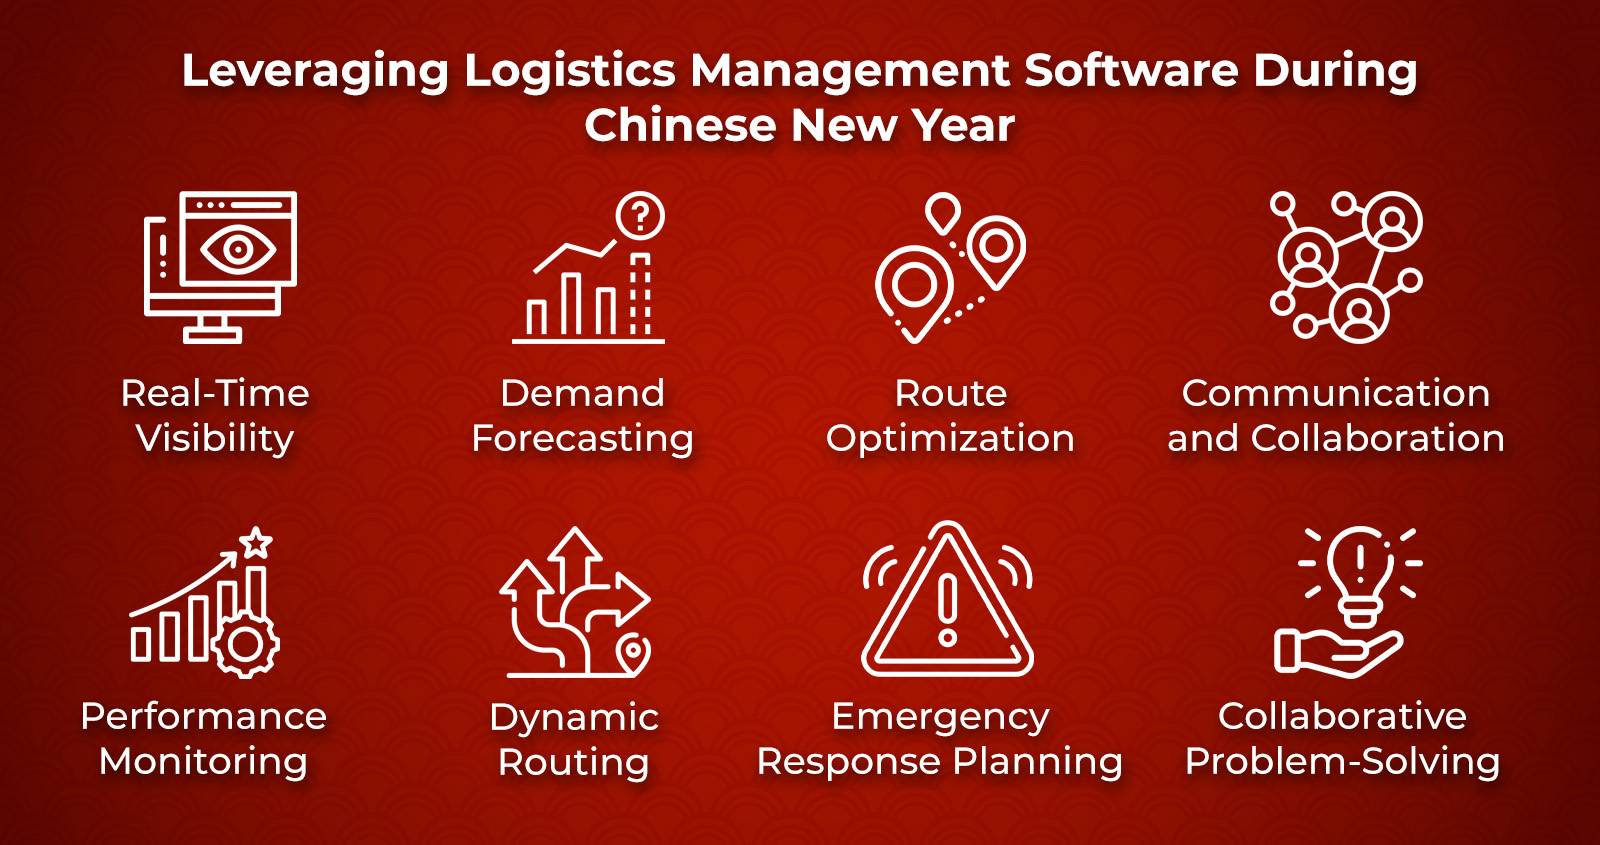 Leveraging Logistics Management Software For Chinese New Year